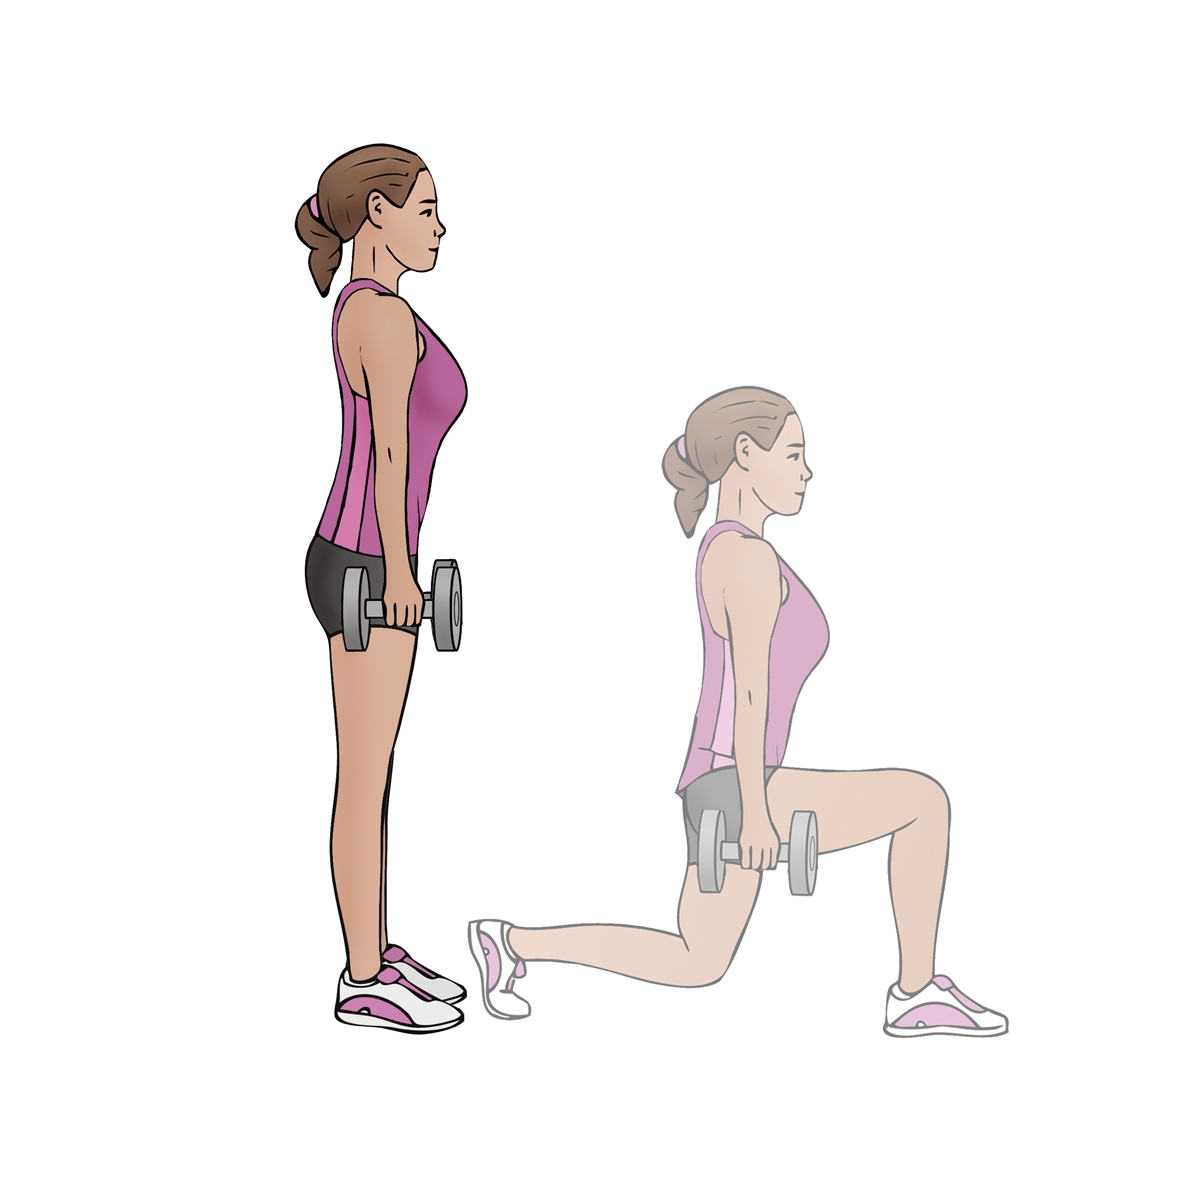 g) Lunges